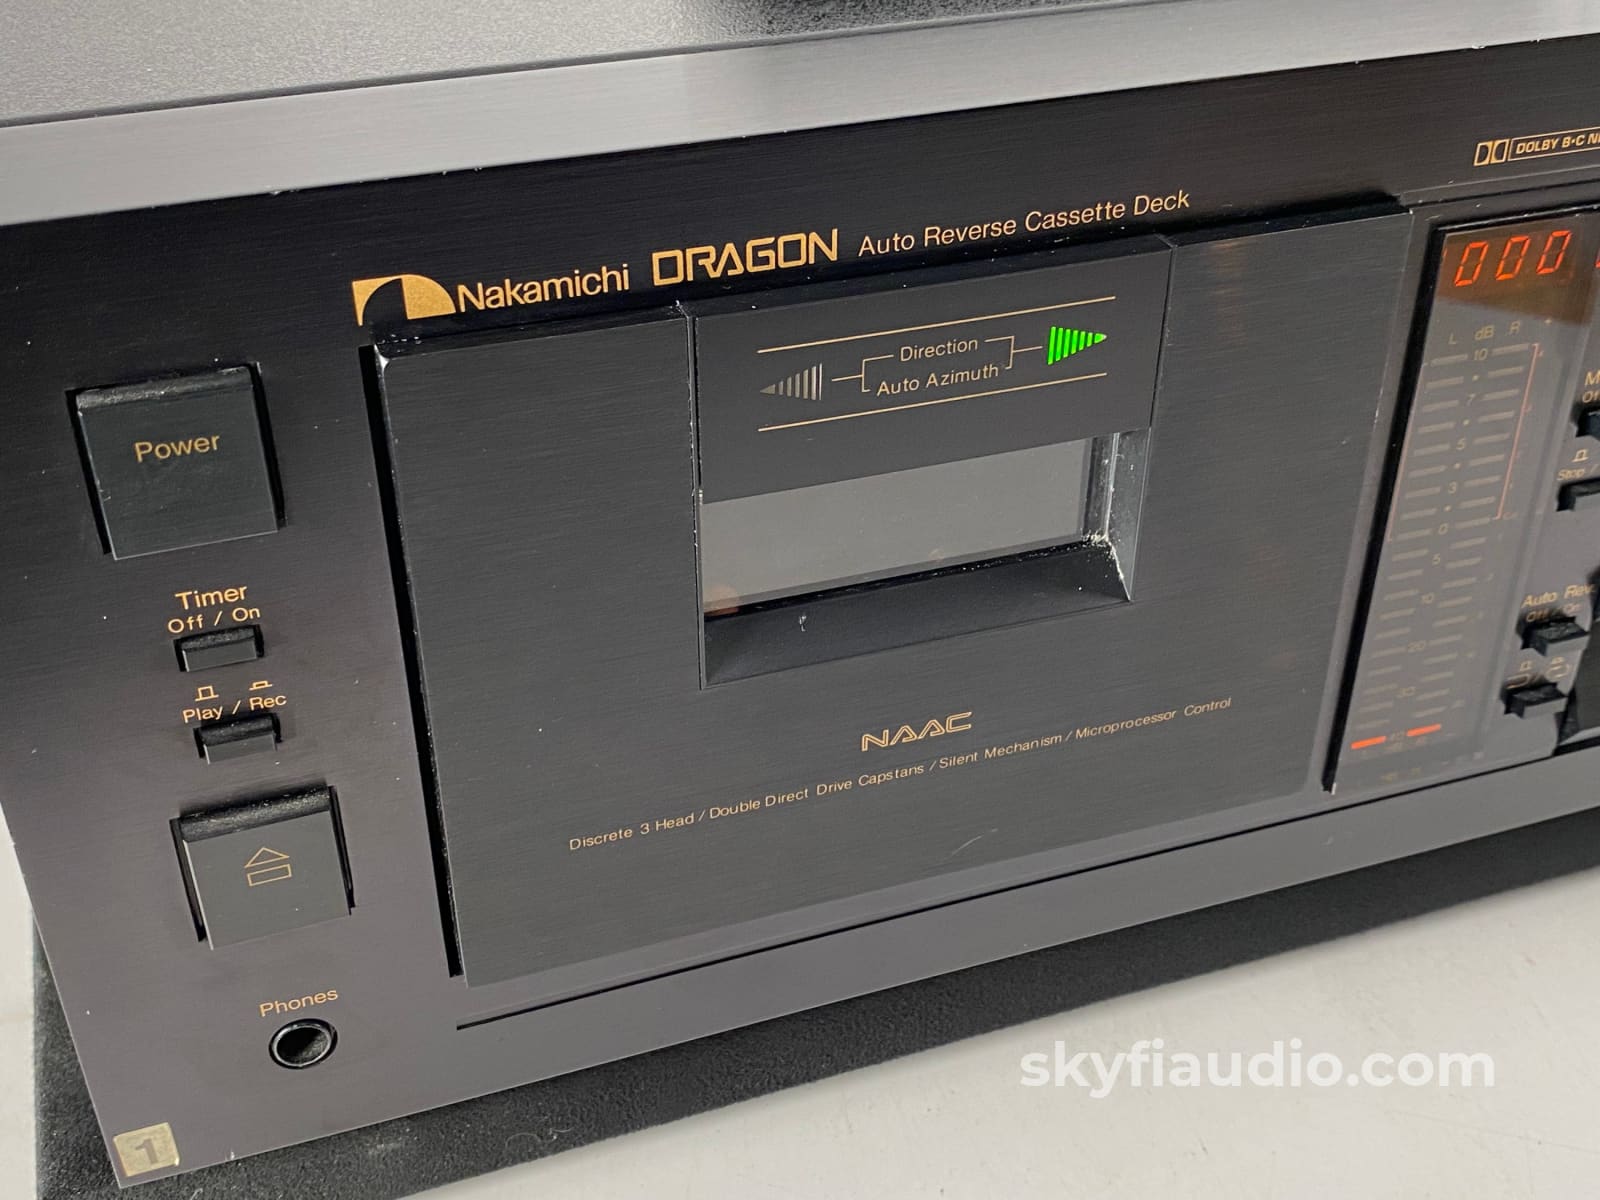 Nakamichi Dragon Tape Deck WITH Remote, Restored and Amazing